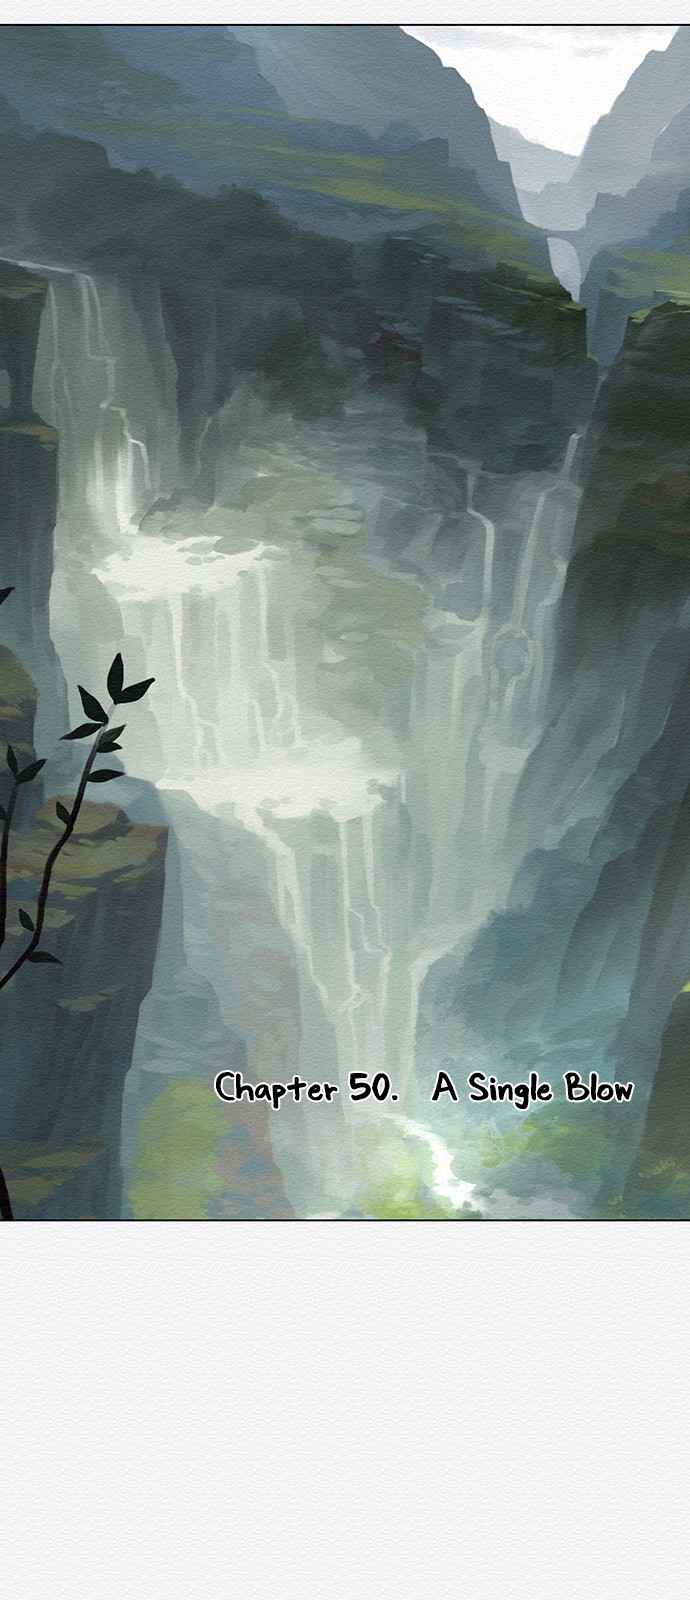 Dawn of the Frozen Wastelands Ch. 50 A Single Blow